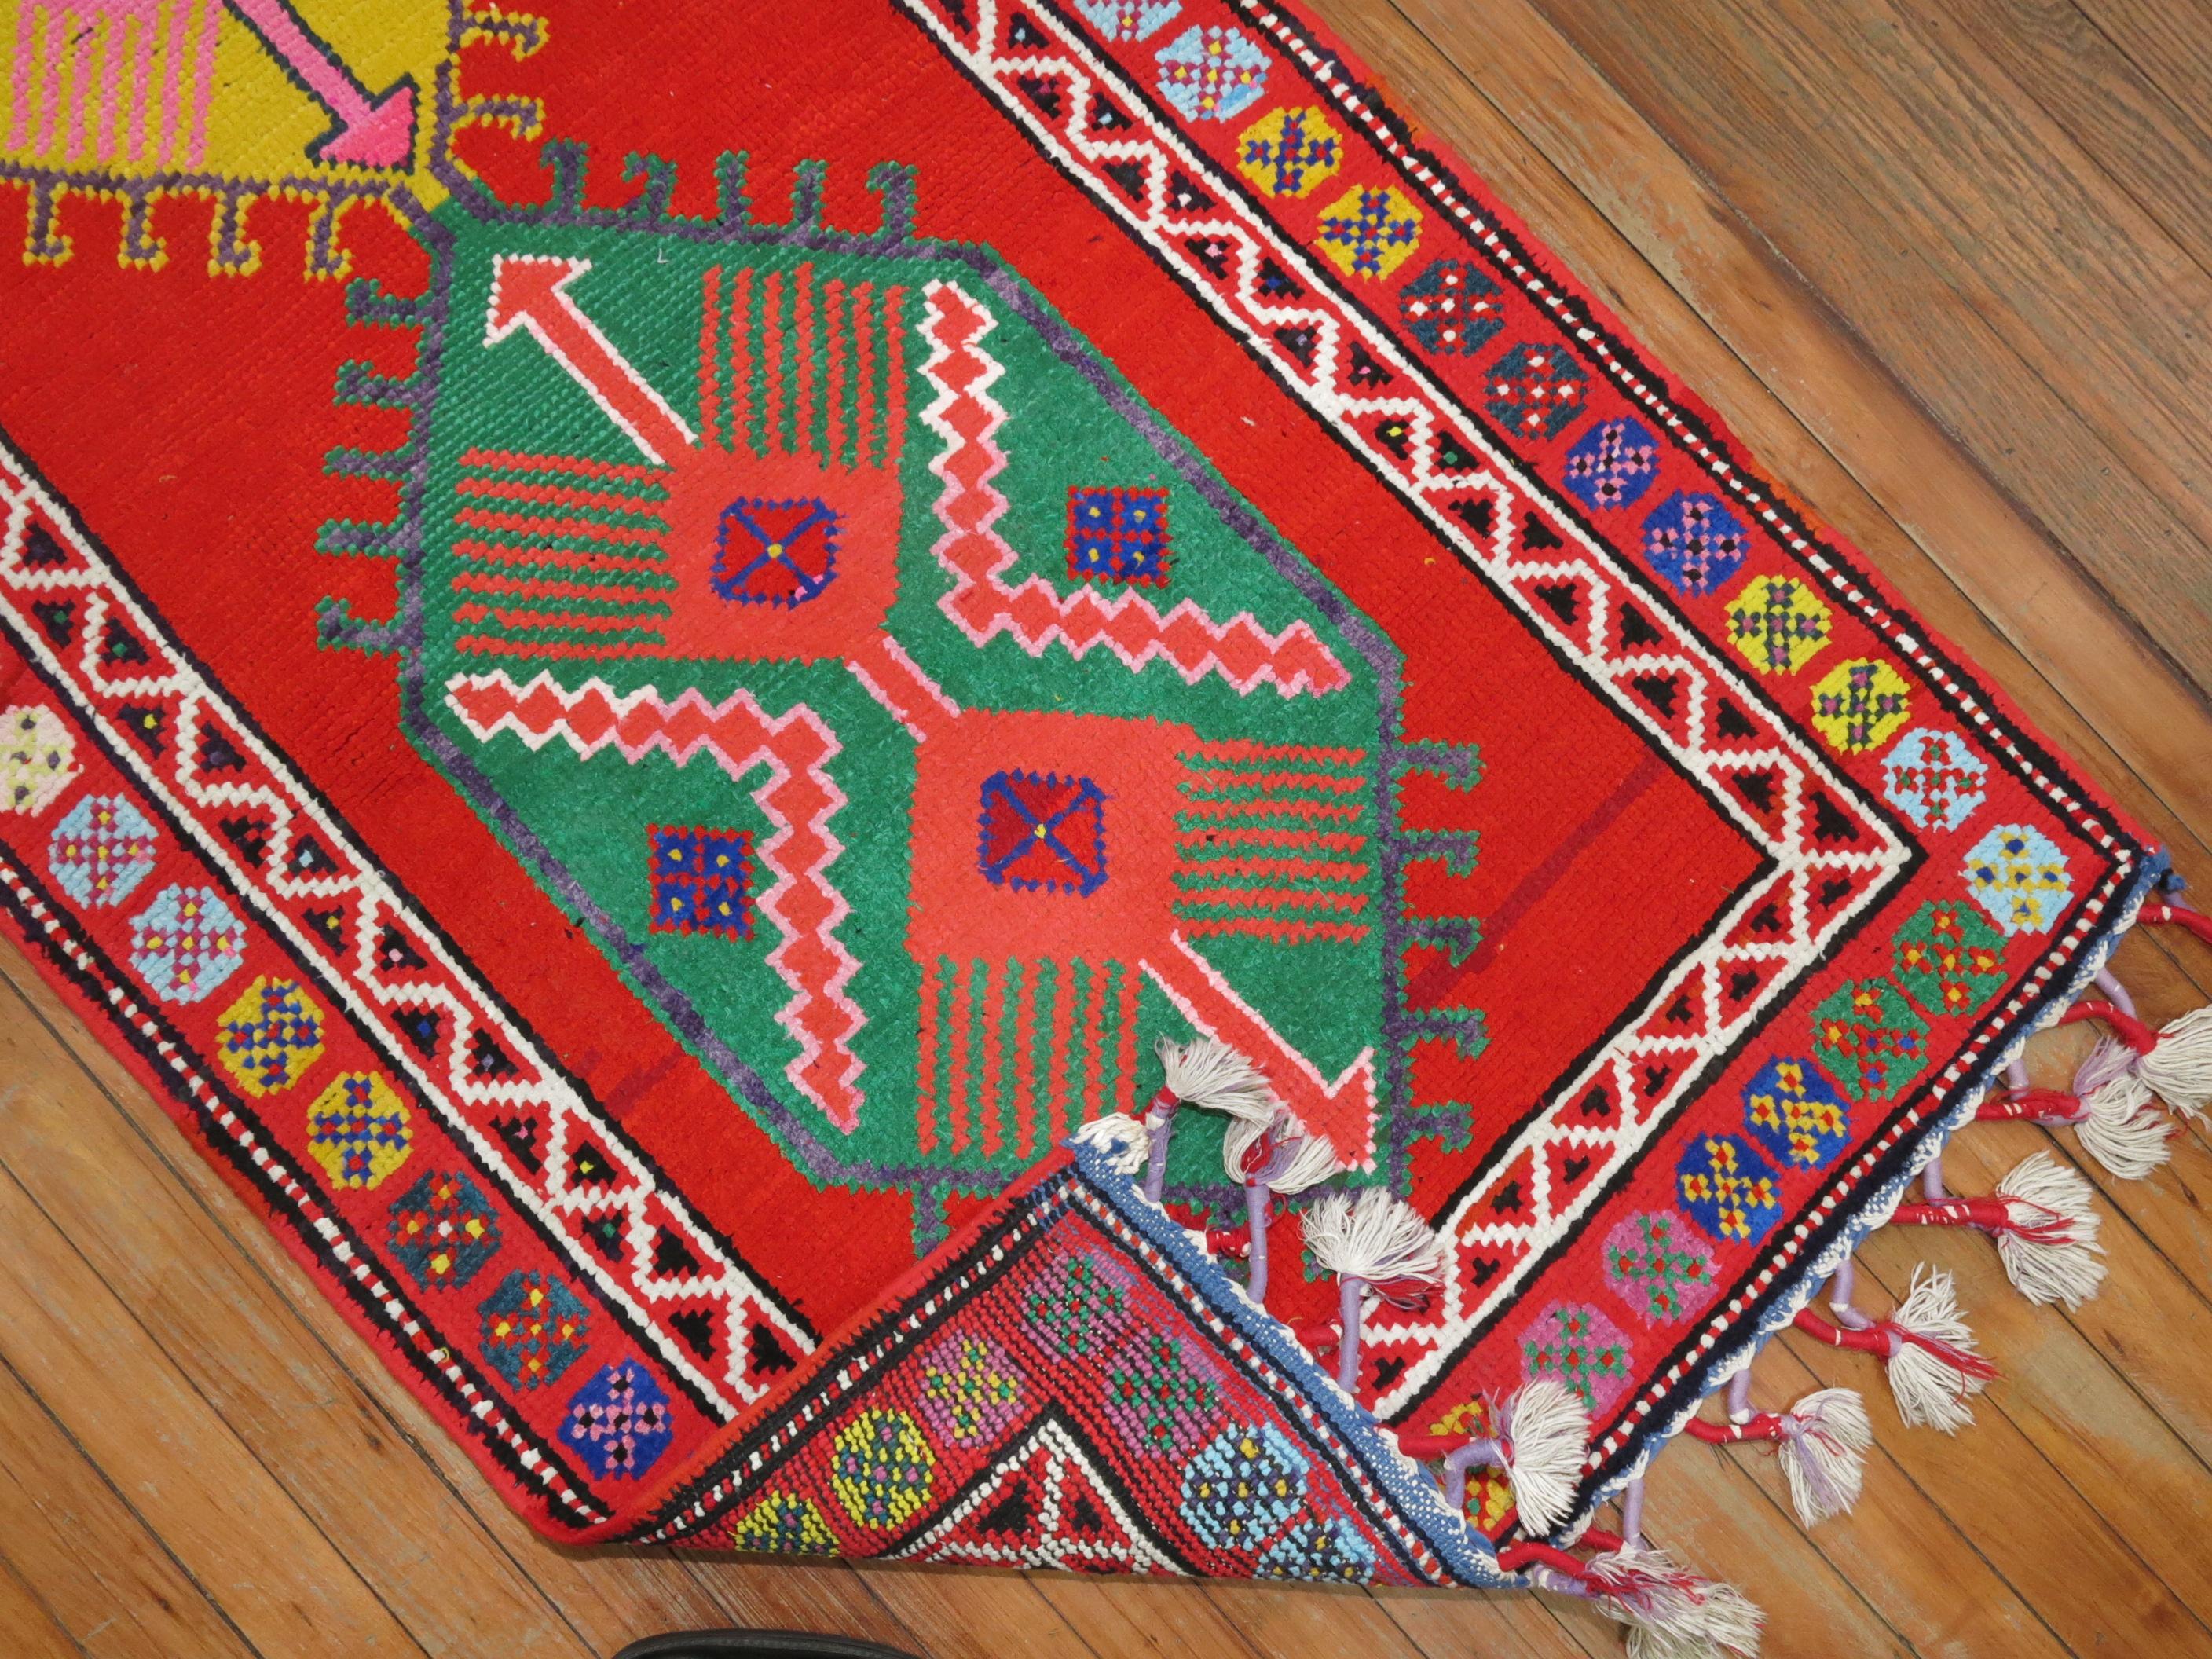 A funky colorful mid-20th century one of a kind Turkish runner woven in central Turkey. The weaver included longer fringes on each side giving it a unique characteristic.